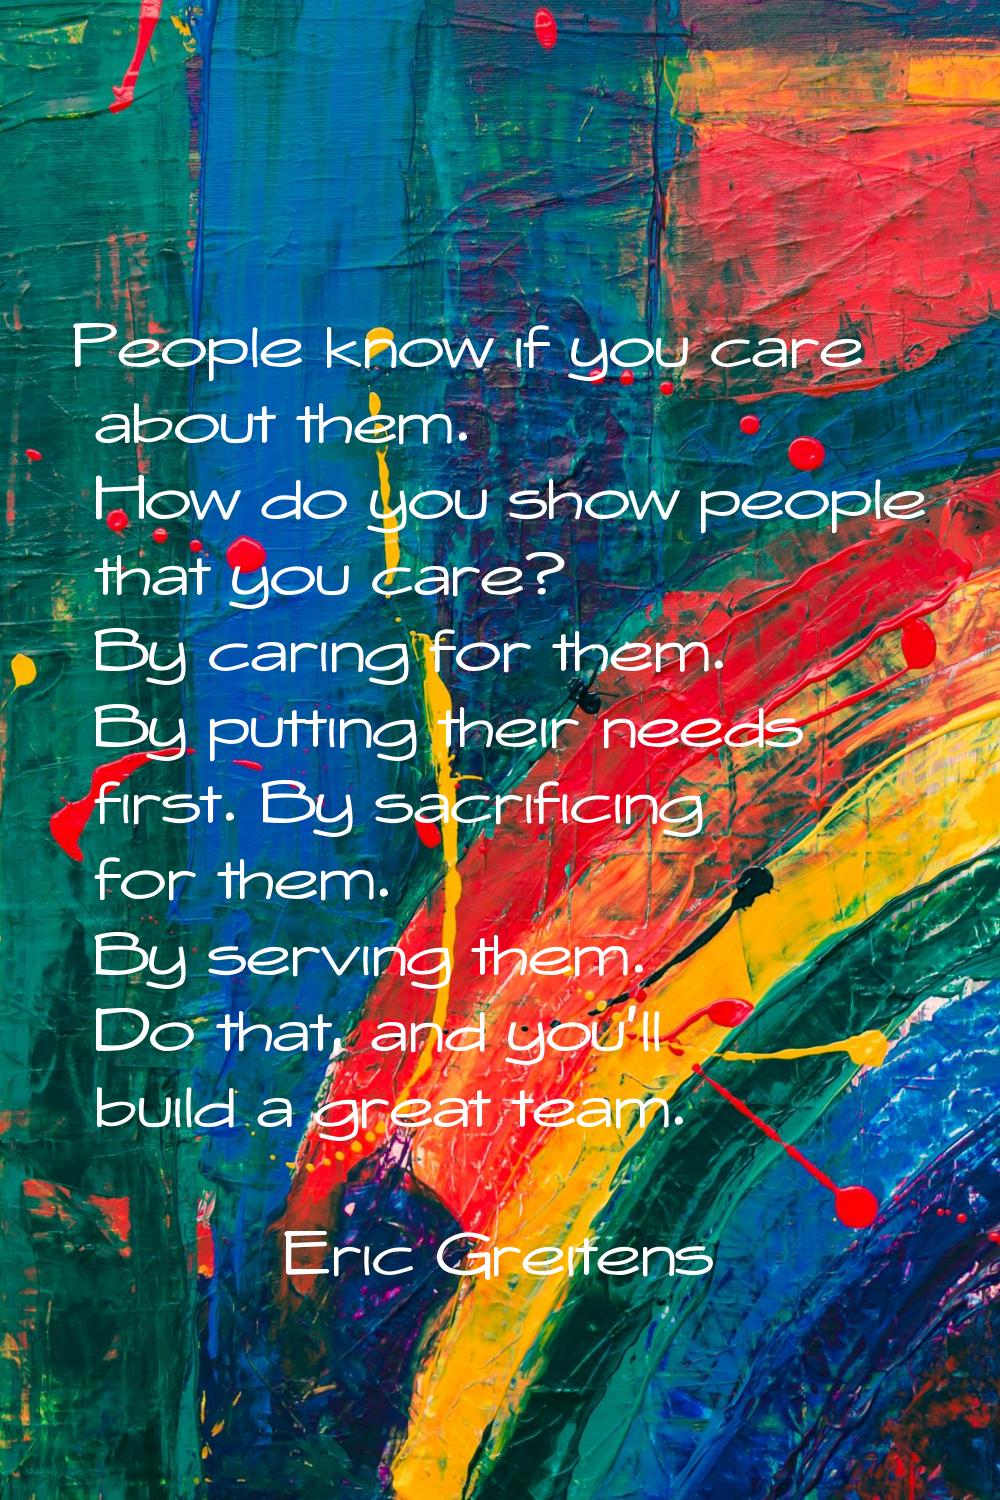 People know if you care about them. How do you show people that you care? By caring for them. By pu